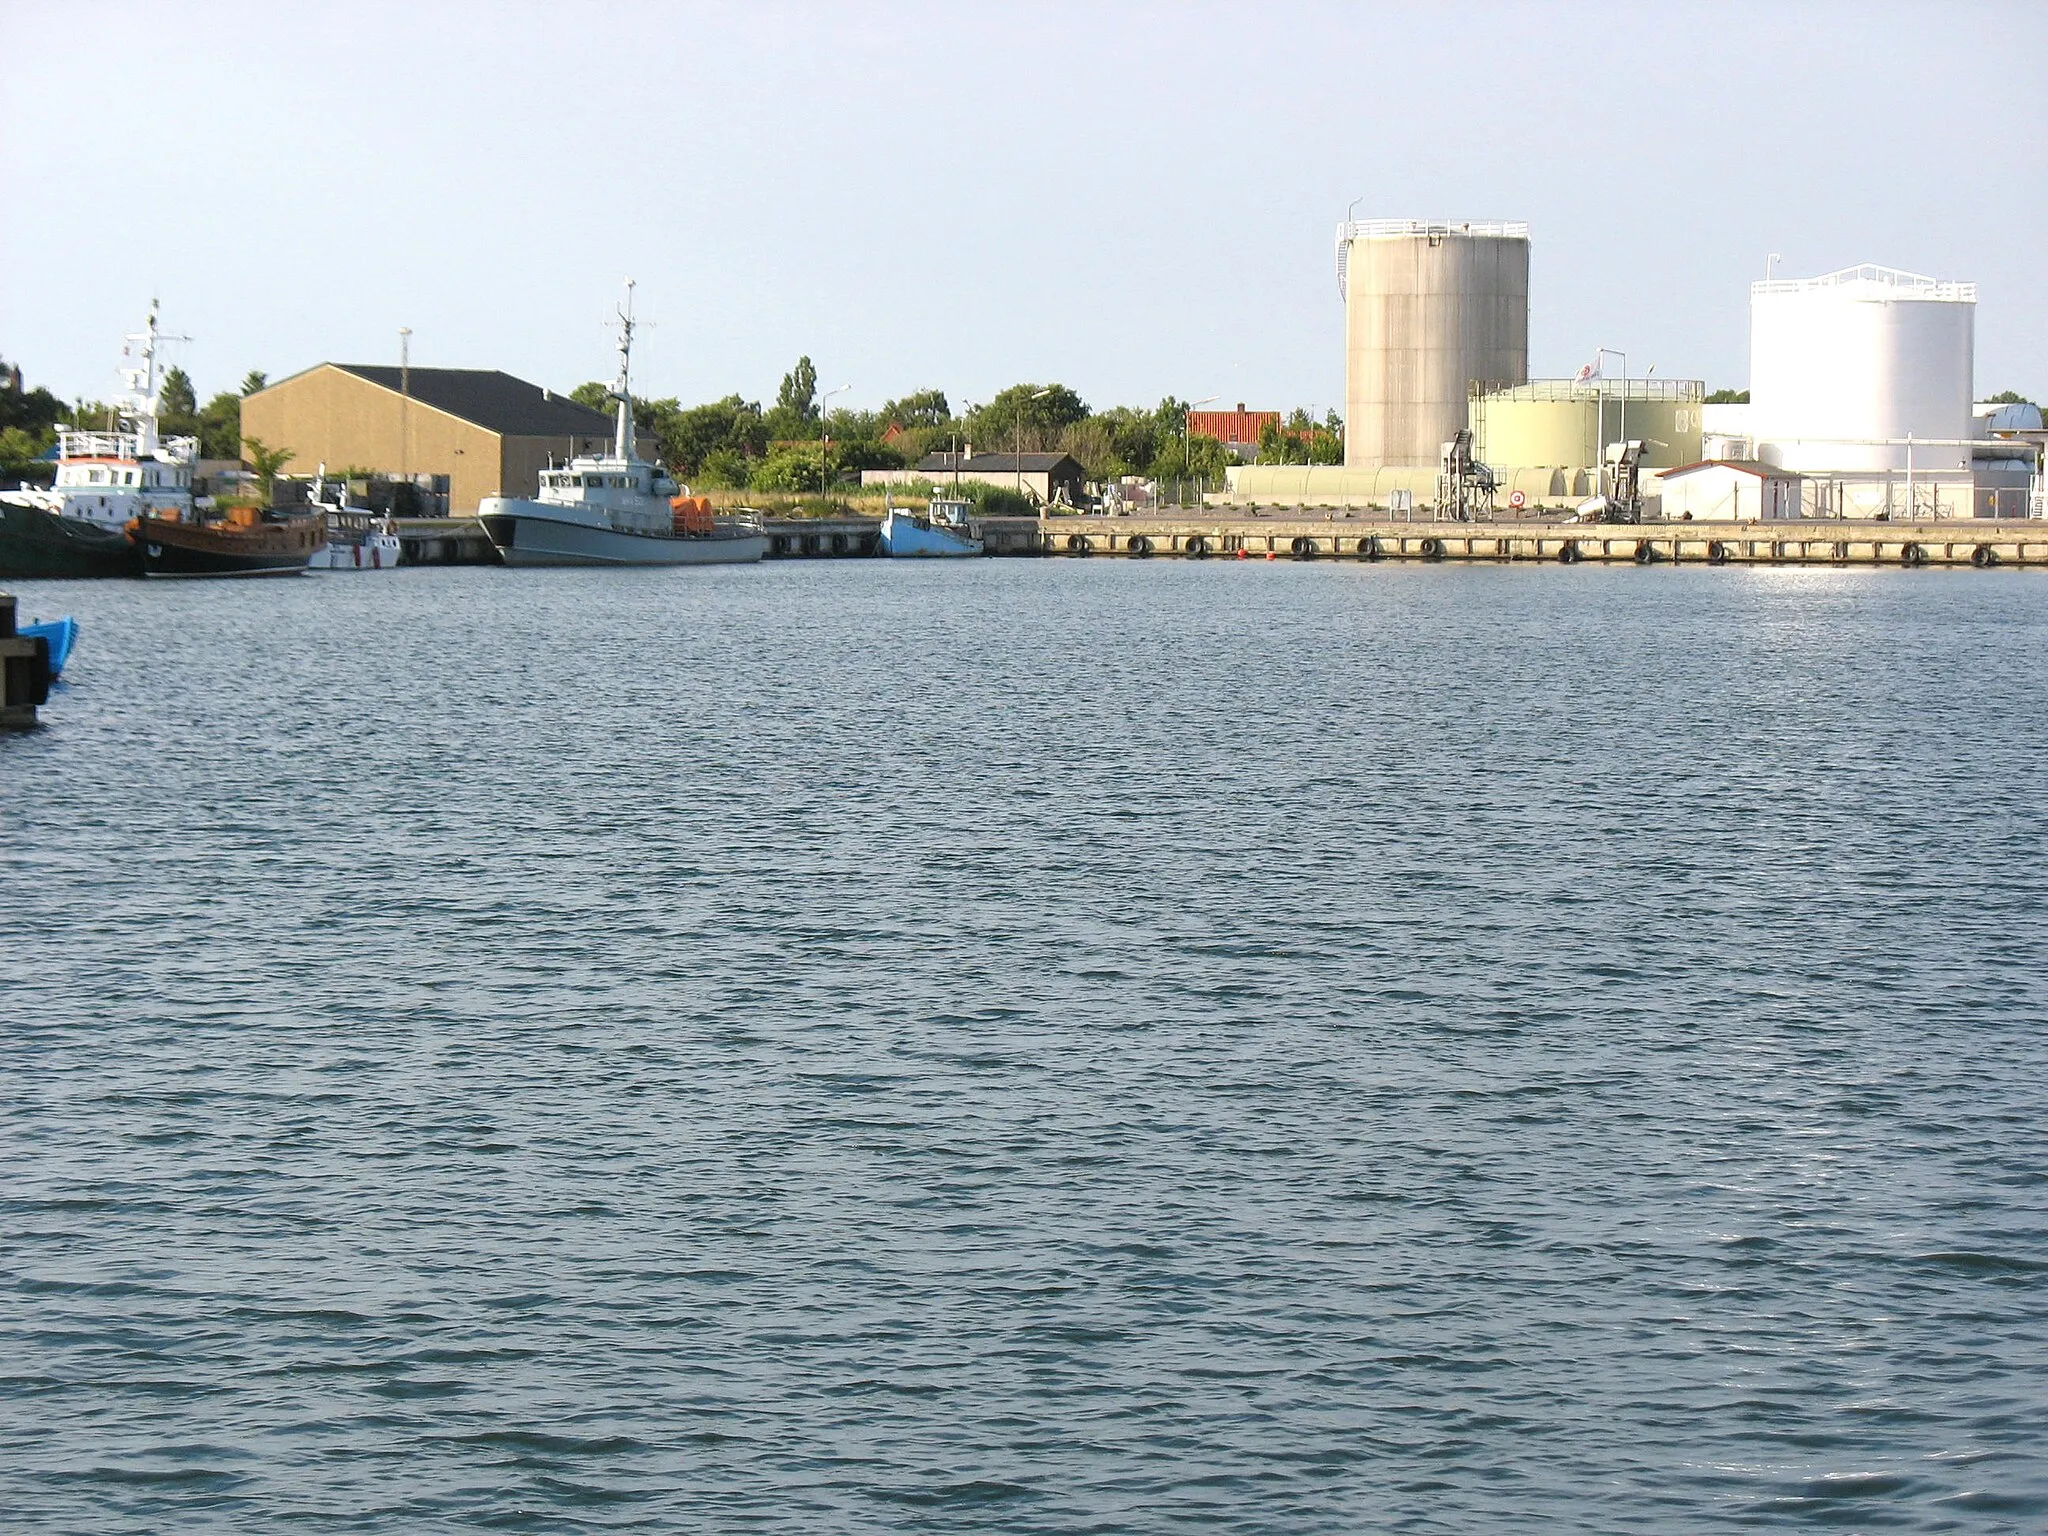 Photo showing: The habour in the small town "Rødbyhavn" located on the island Lolland in east Denmark.